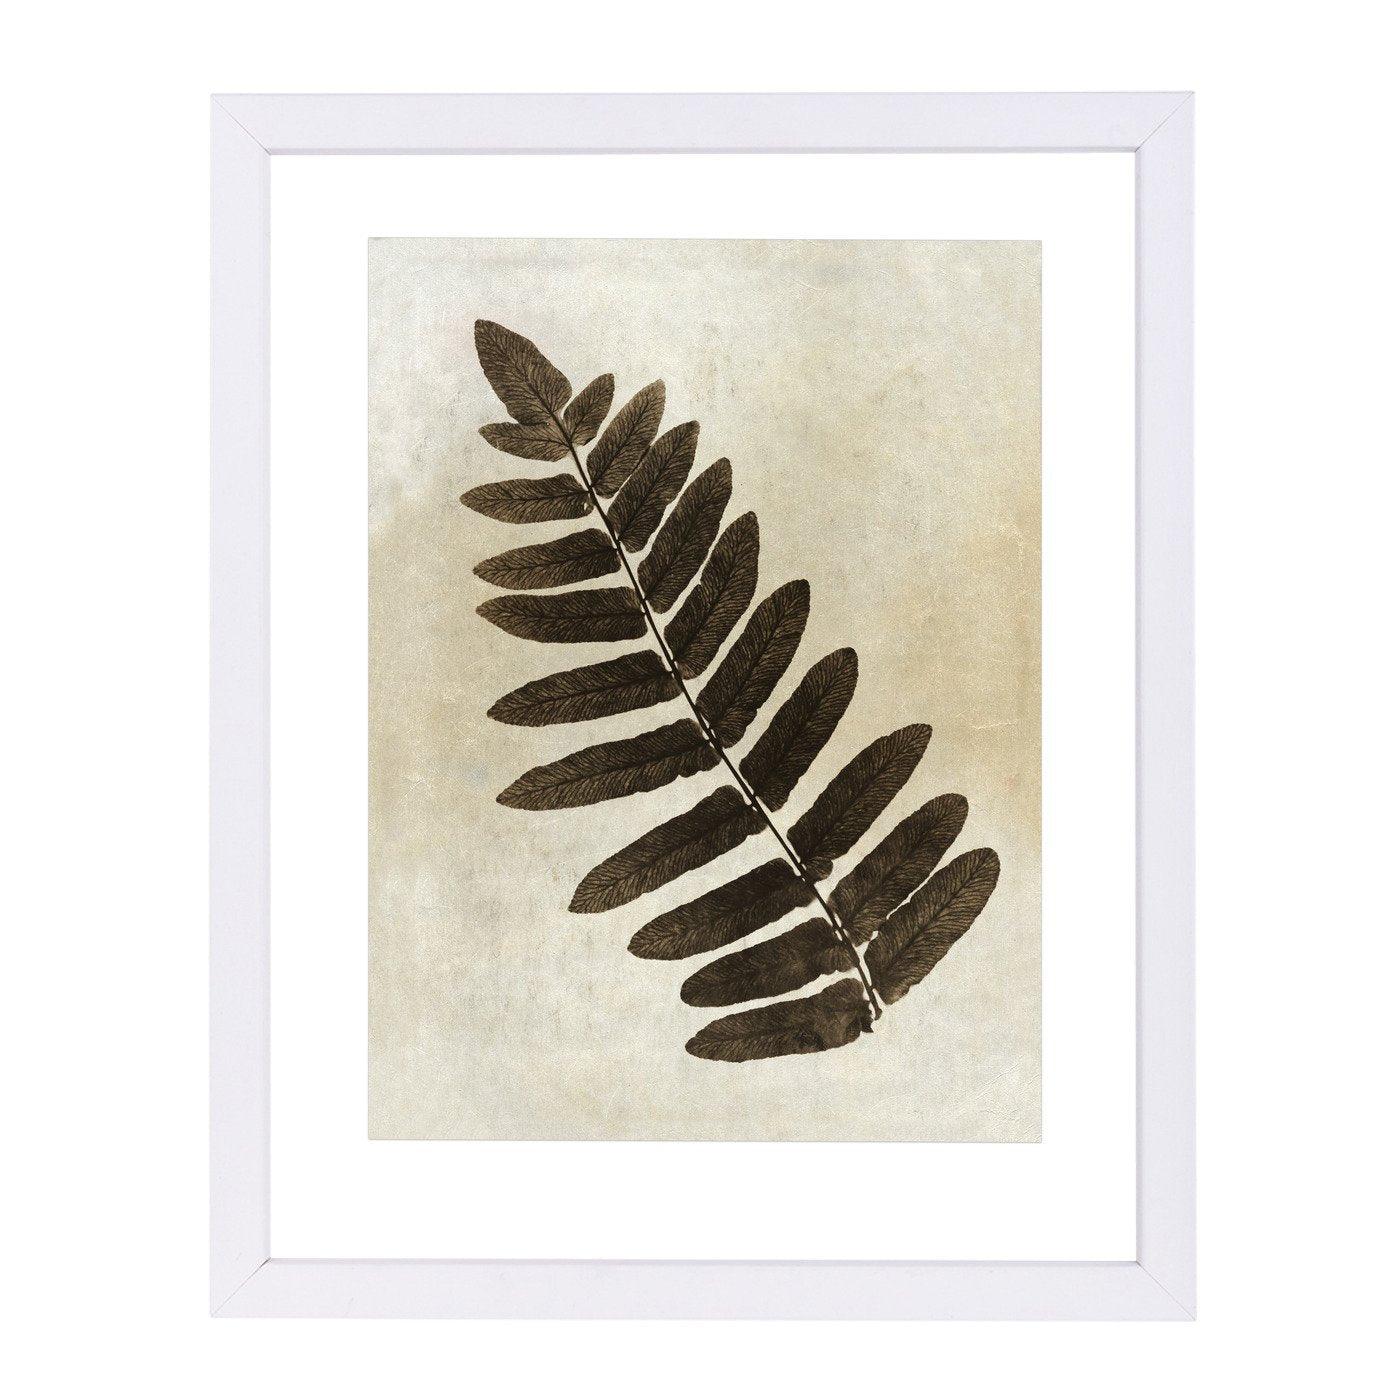 Sepia Leaf Collage Ii By Chaos & Wonder Design - Framed Print - Americanflat